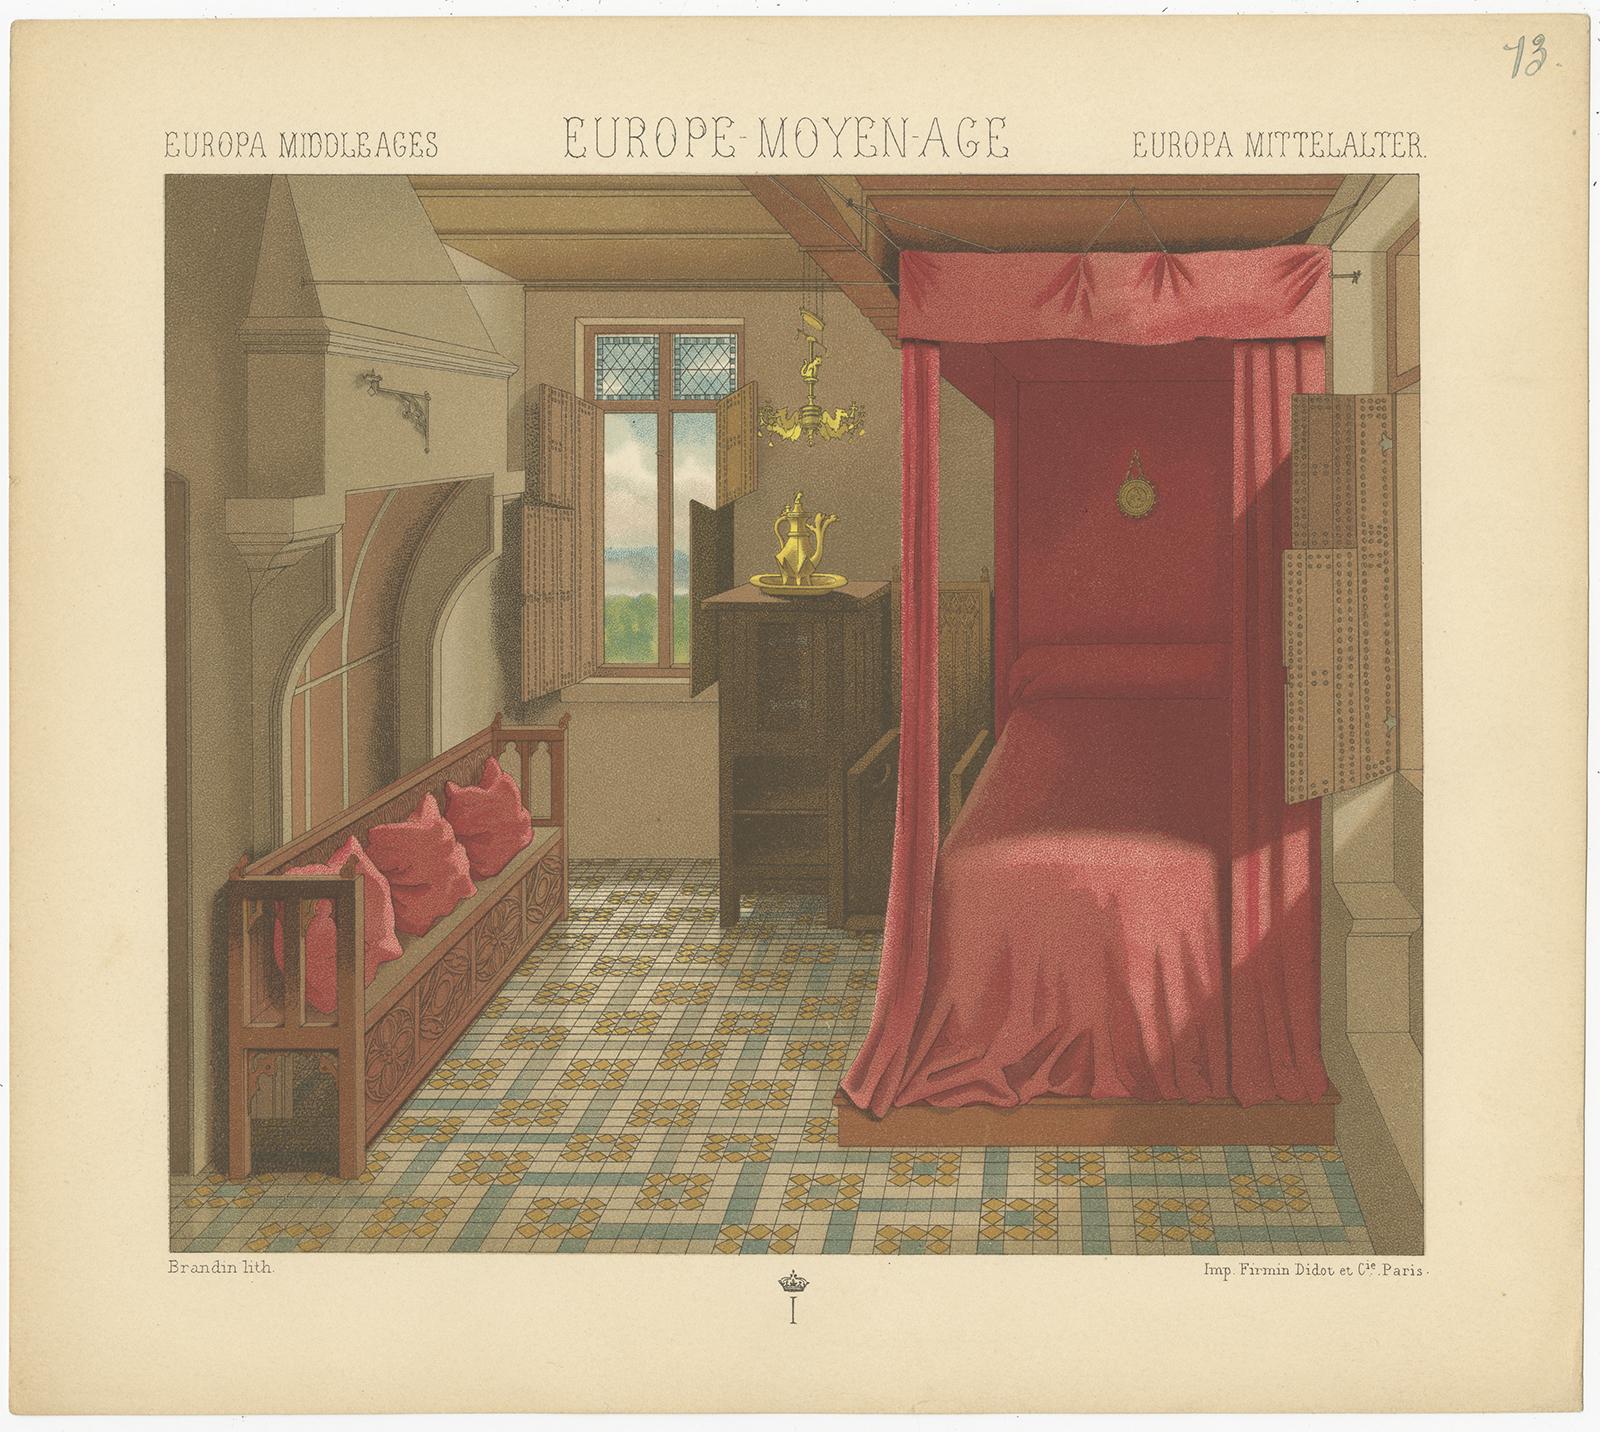 Antique print titled 'Europa Middle Ages - Europe Moyen Age - Europa Mittelalter'. Chromolithograph of European Middle Ages Bedroom. This print originates from 'Le Costume Historique' by M.A. Racinet. Published, circa 1880.